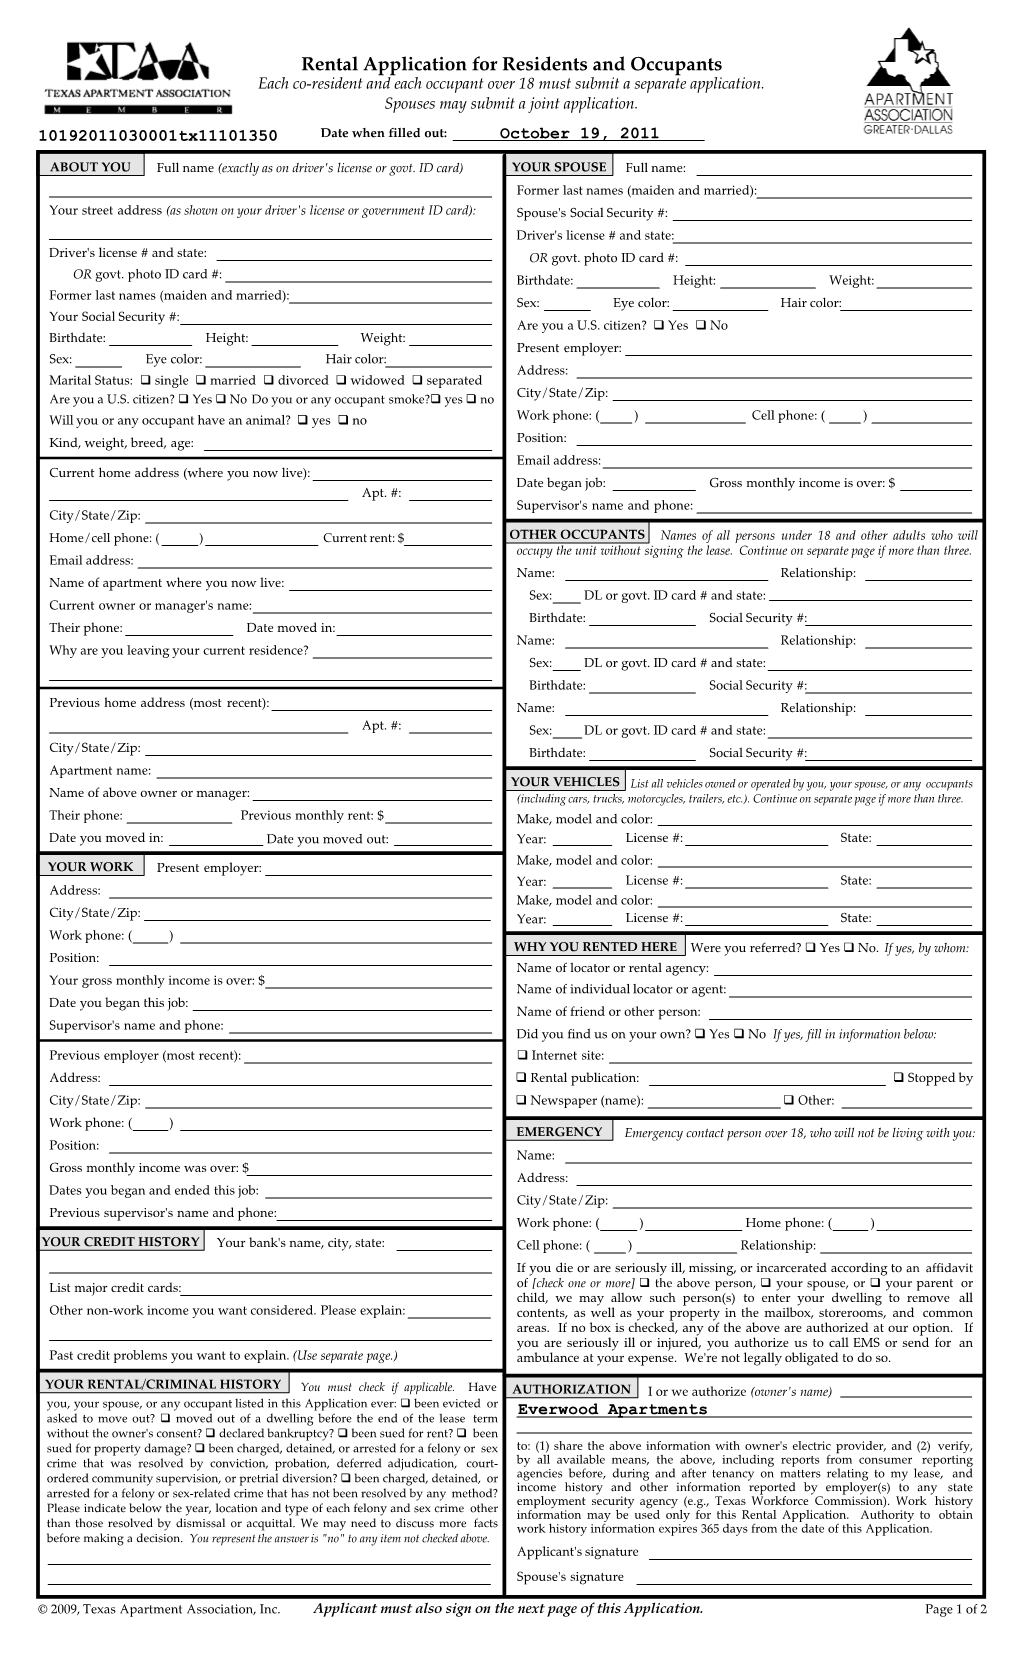 Rental Application for Residents and Occupants Each Co-Resident and Each Occupant Over 18 Must Submit a Separate Application